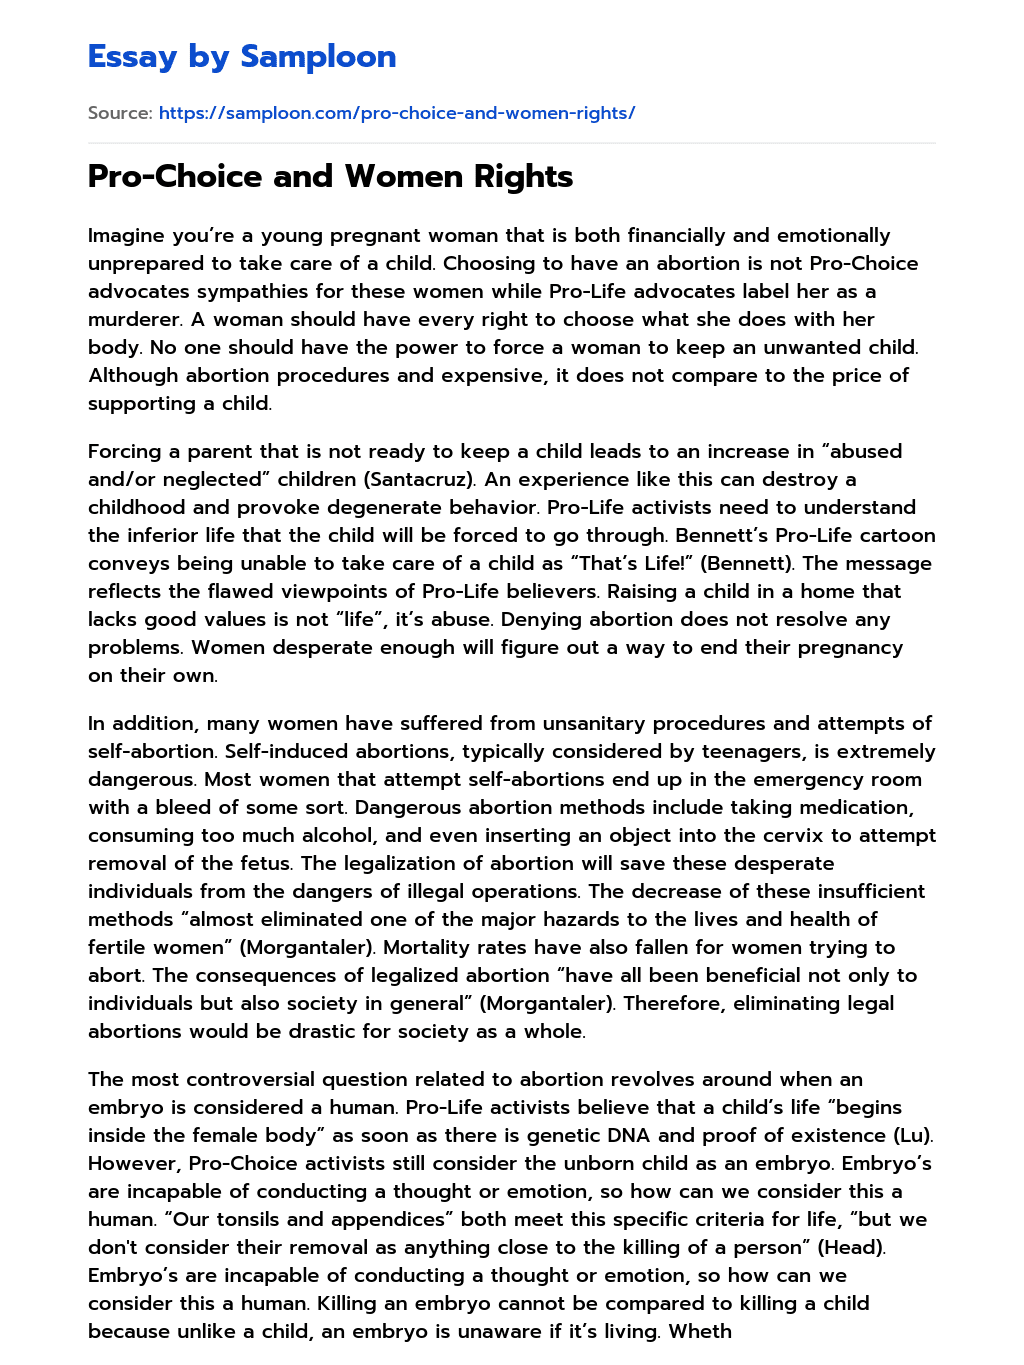 Pro-Choice and Women Rights essay